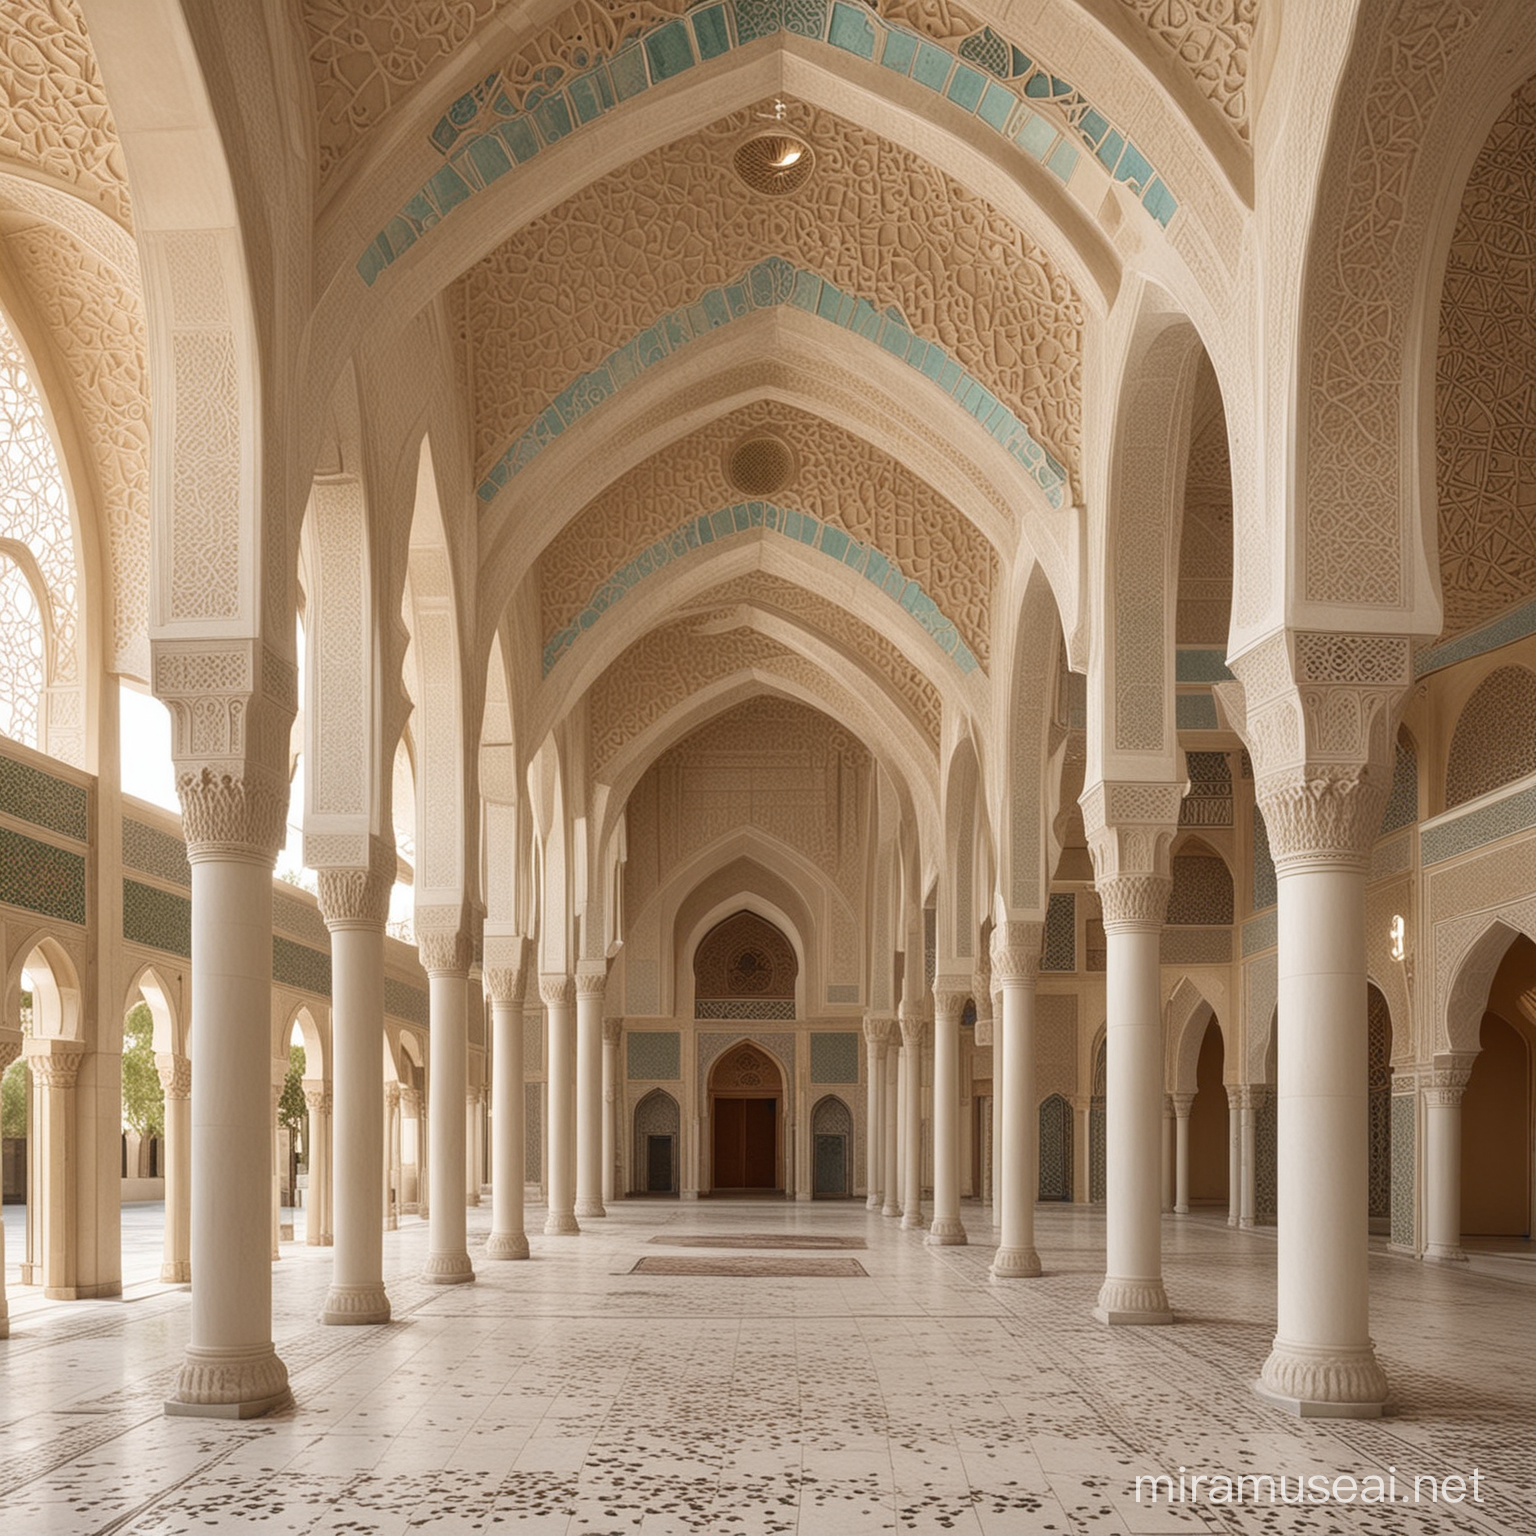 create an architectural school with islamic postmodern style